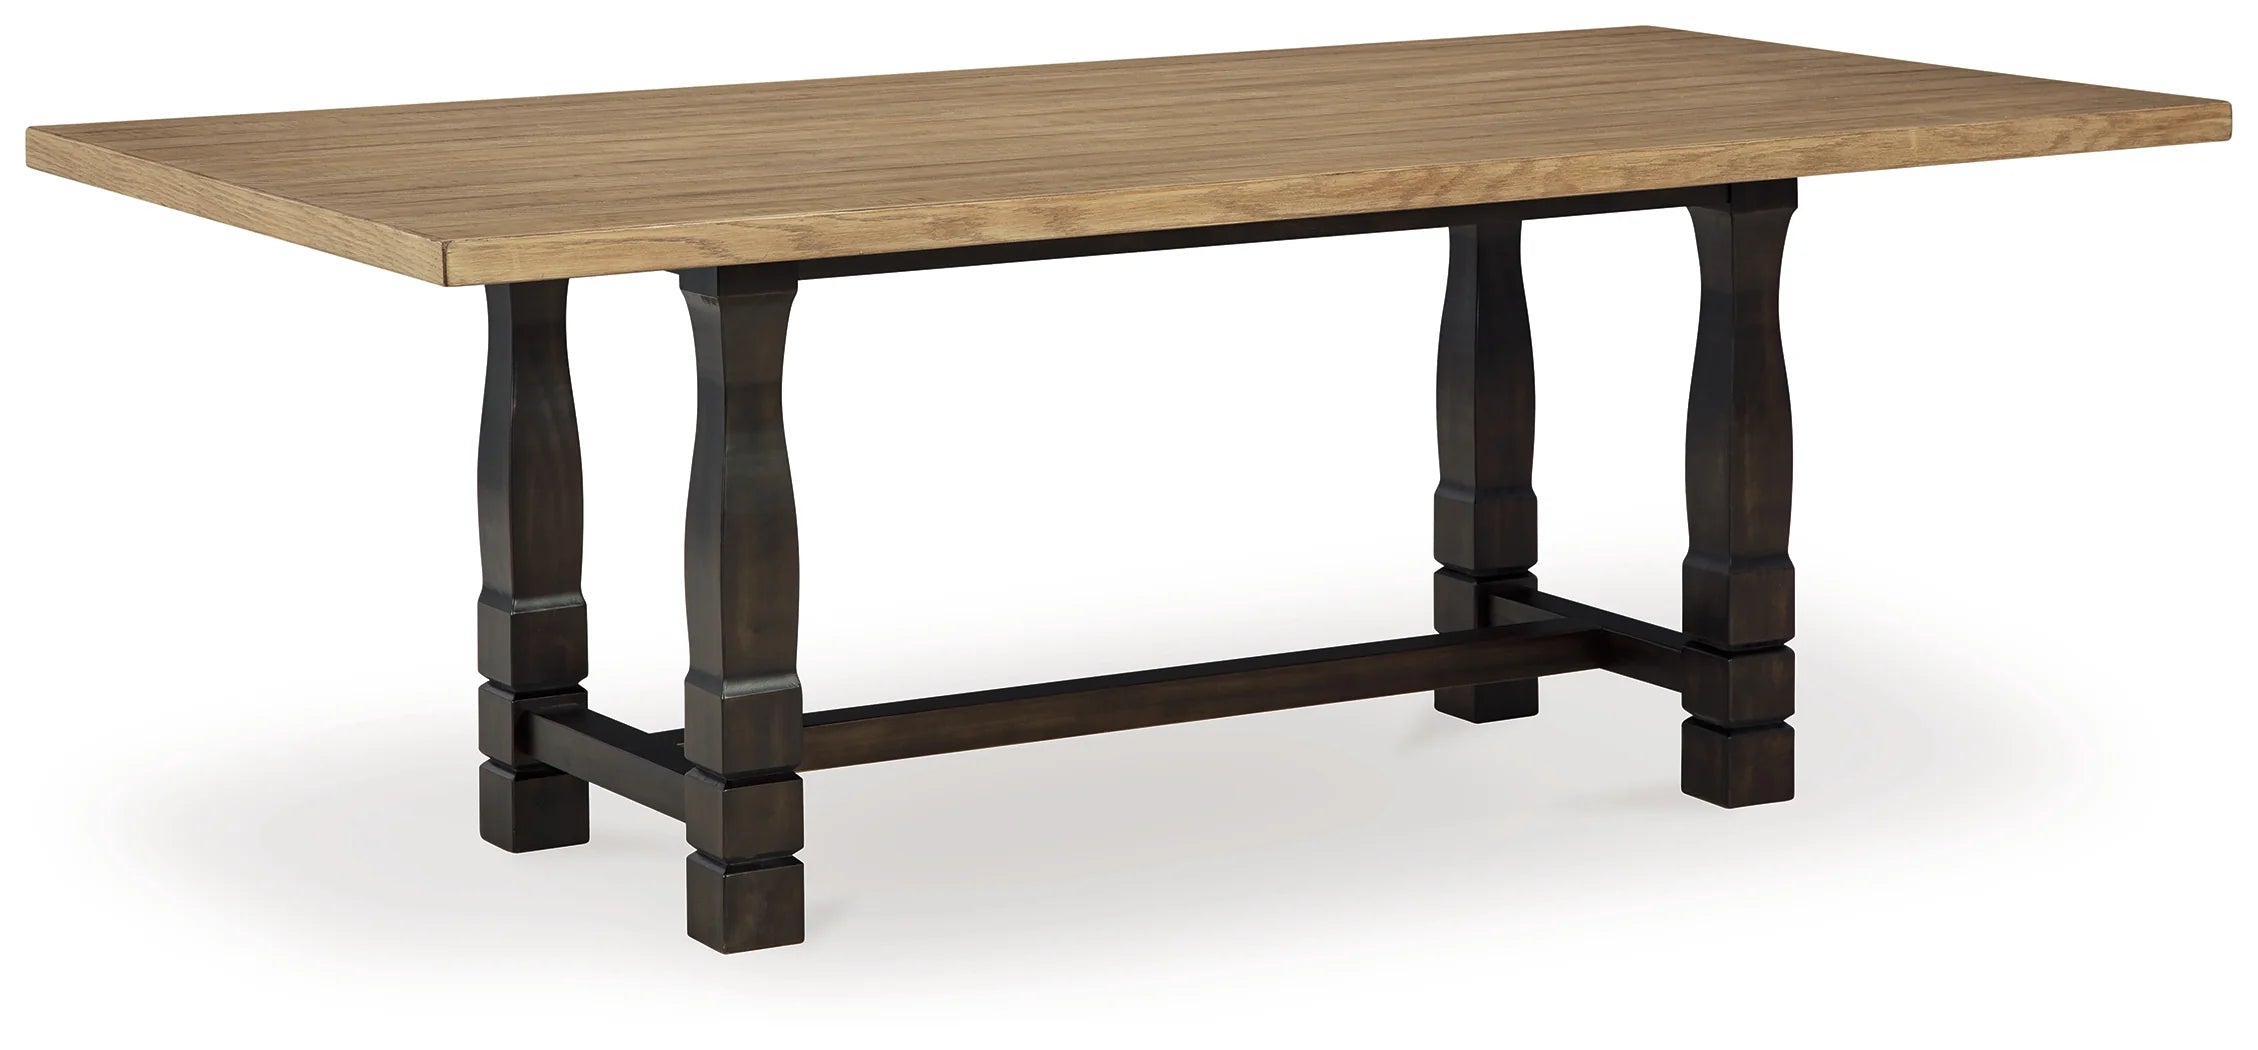 Charterton Brown Dining Table